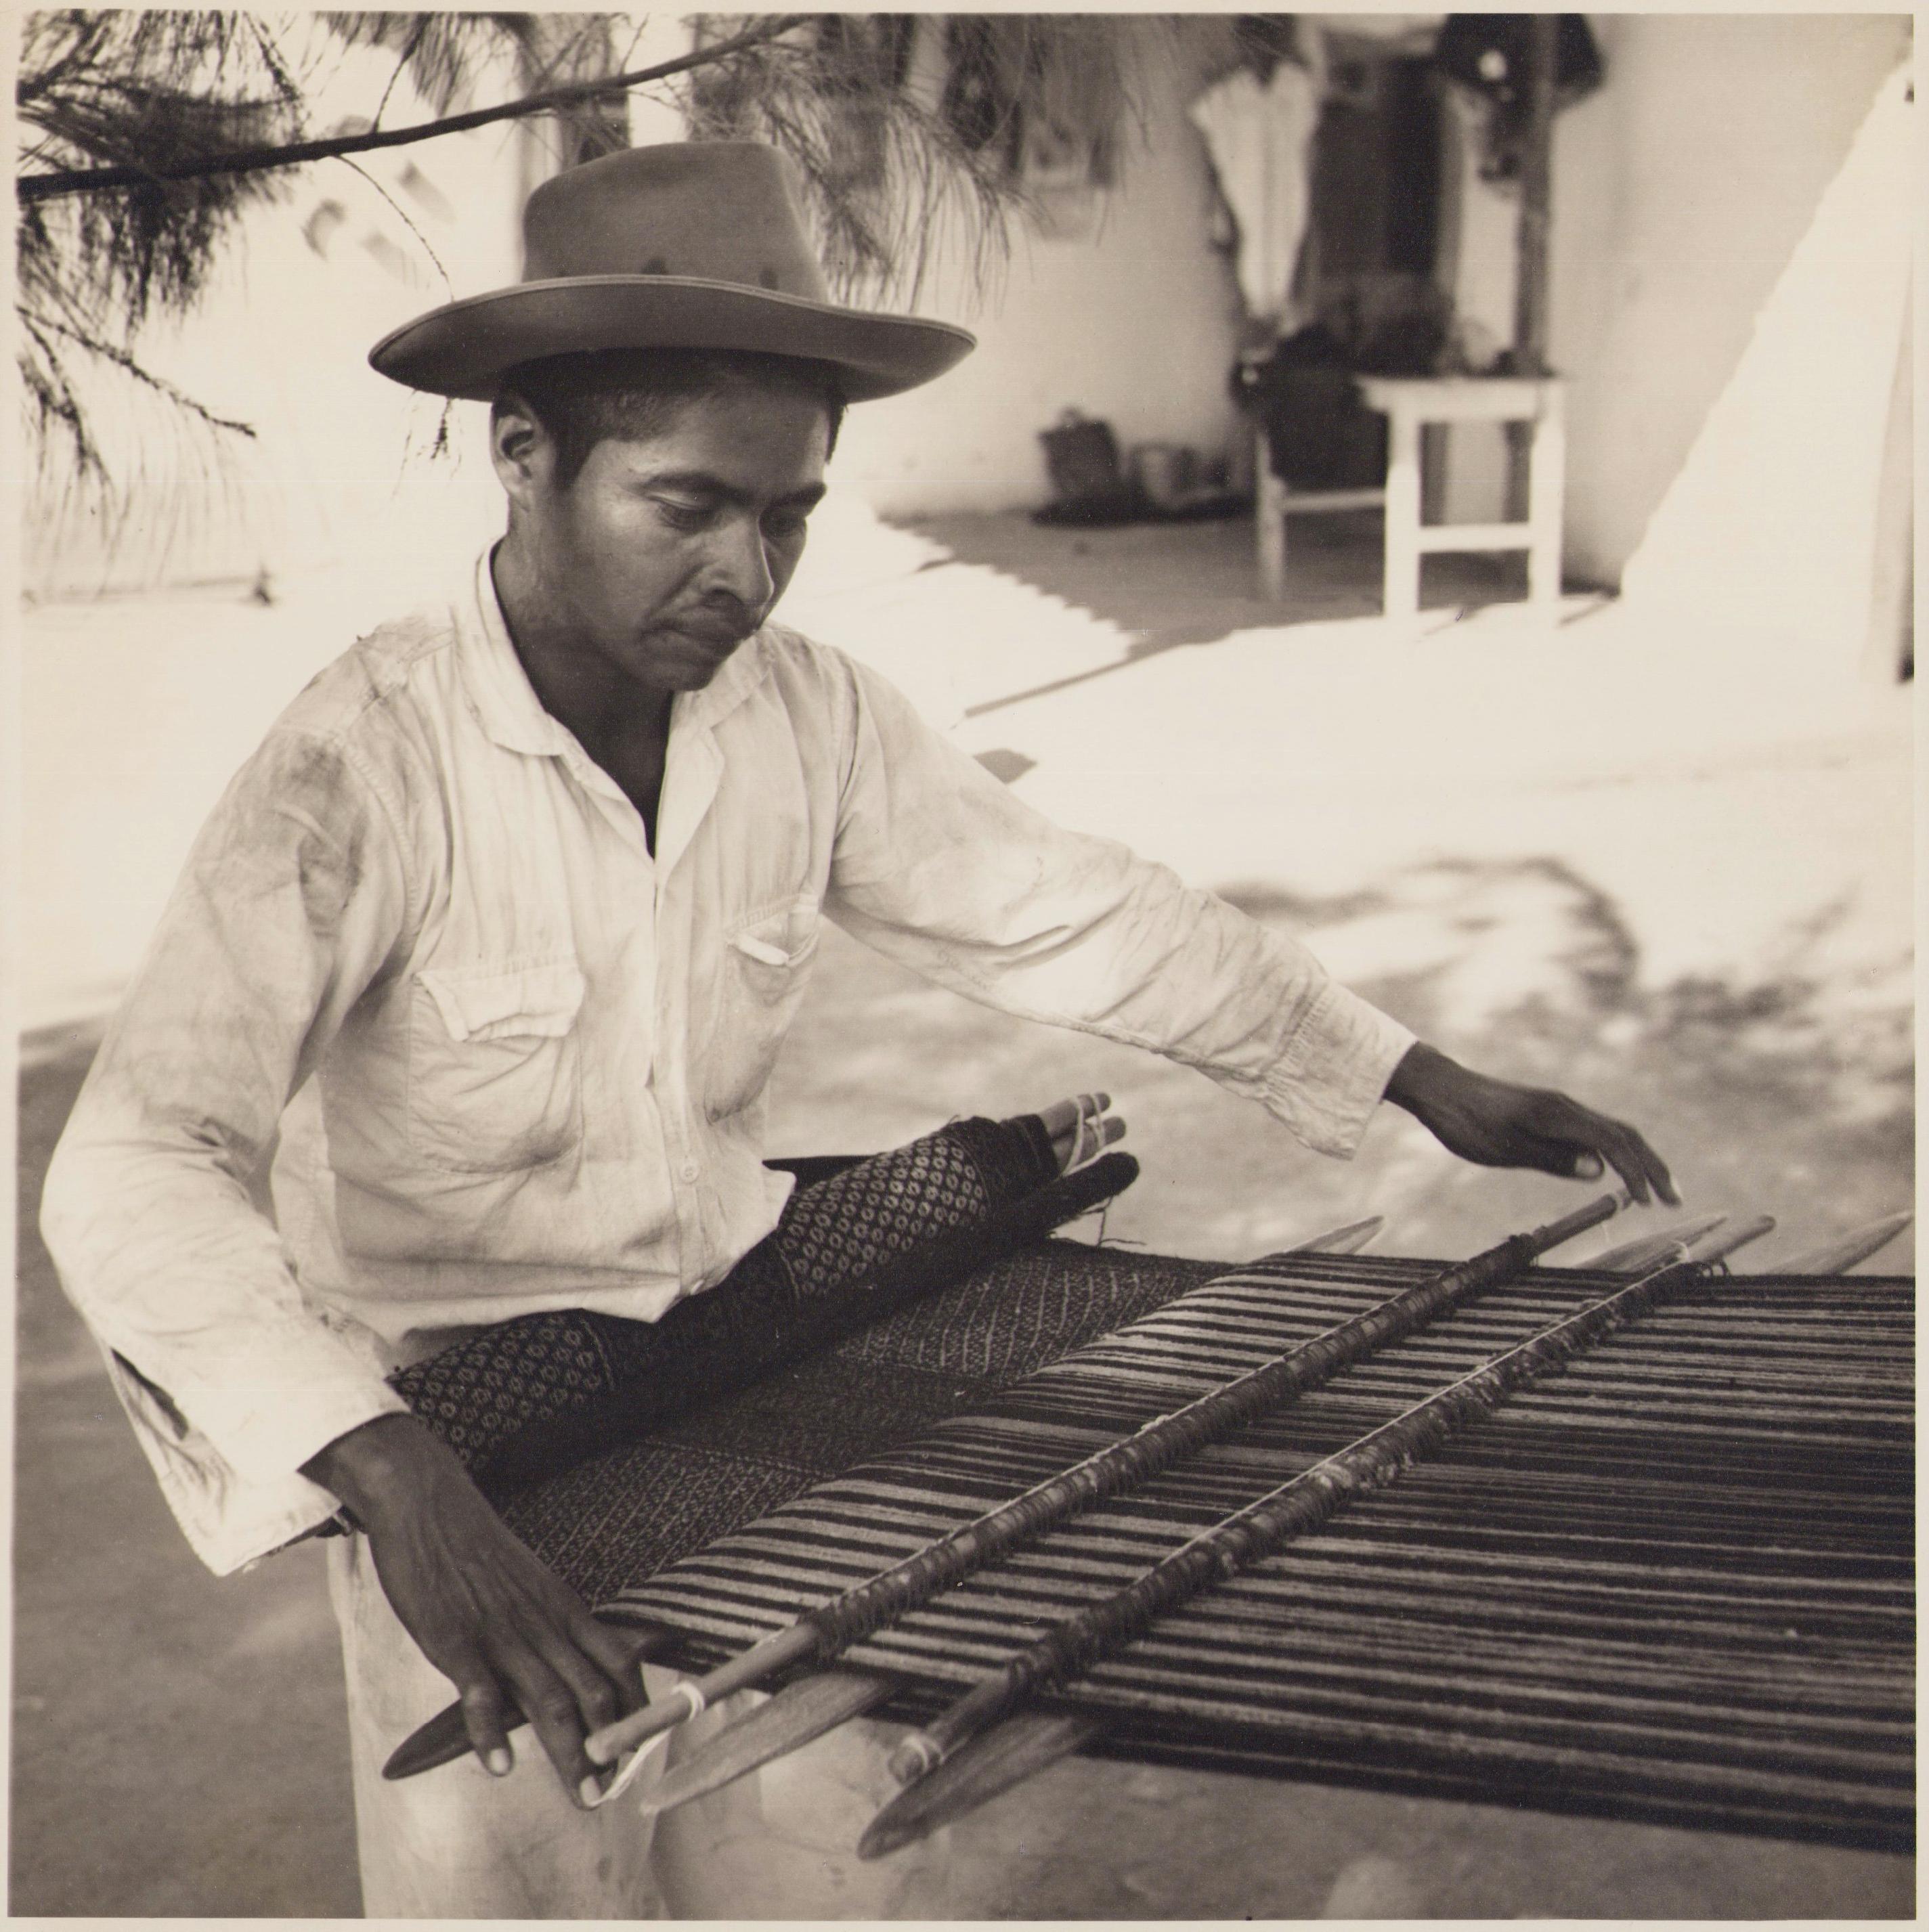 Mexico, Man, Handcraft, Black and White Photography, 1960s, 24, 2 x 24 cm